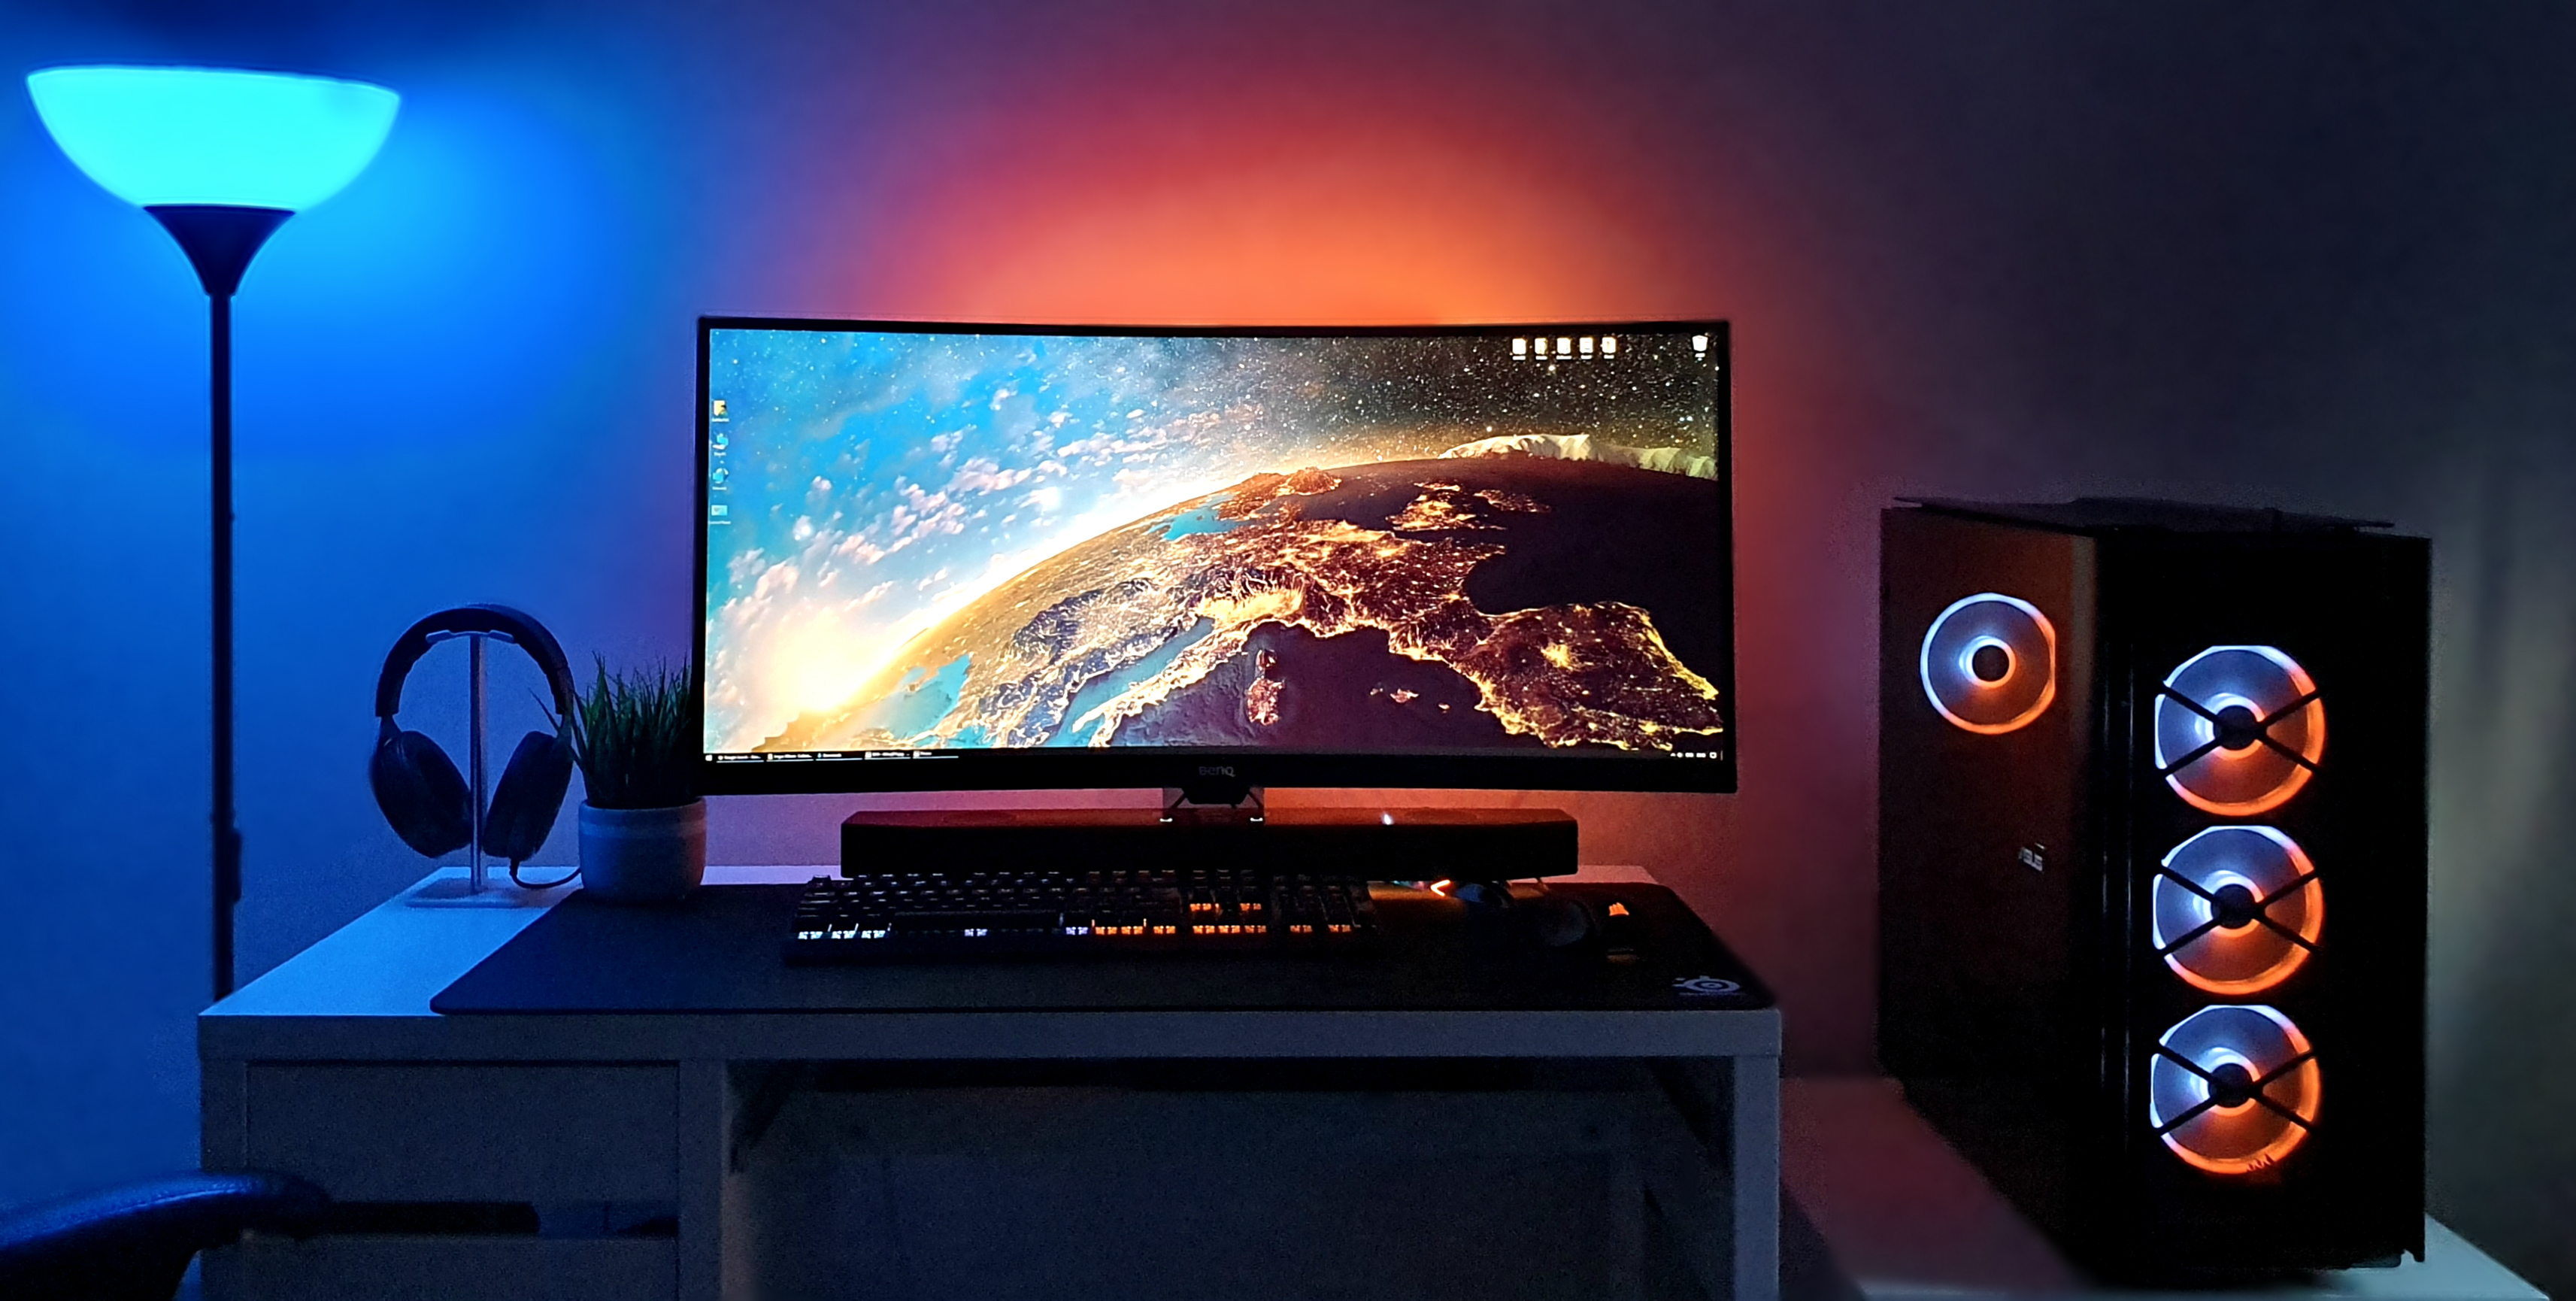 Colour Matching With Your Wallpaper Can Really Bring Setup To